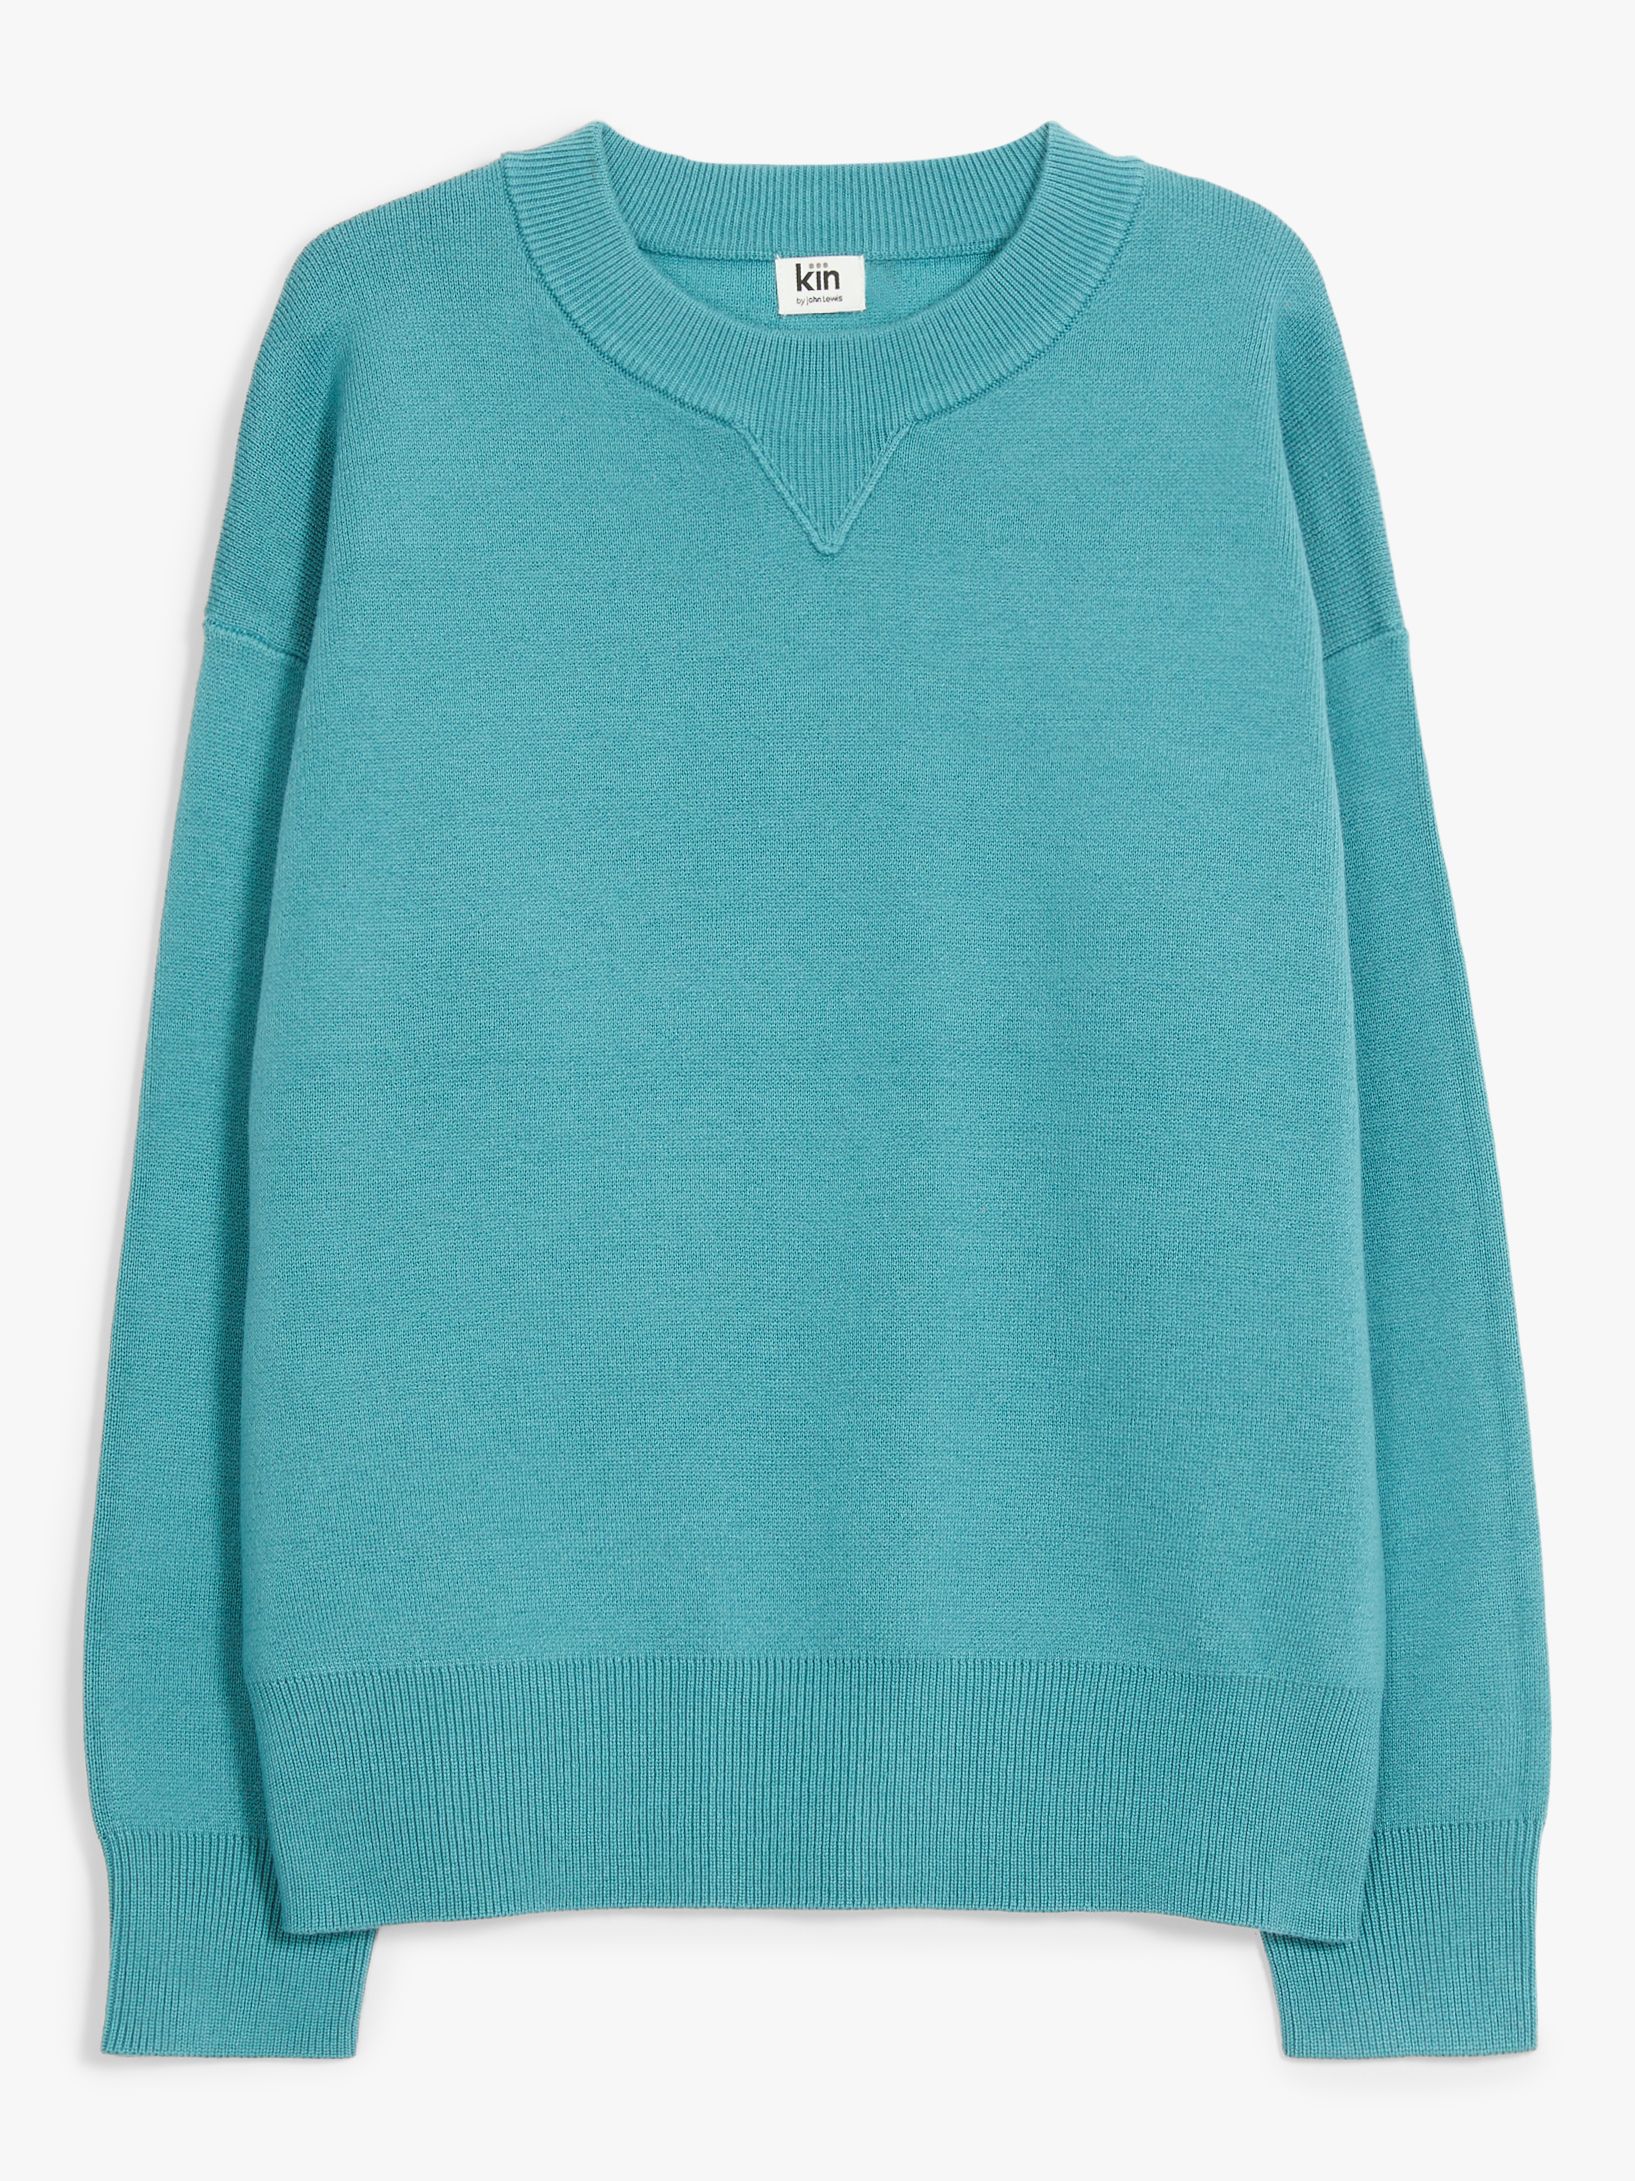 Kin Compact Knitted Jumper, Blue